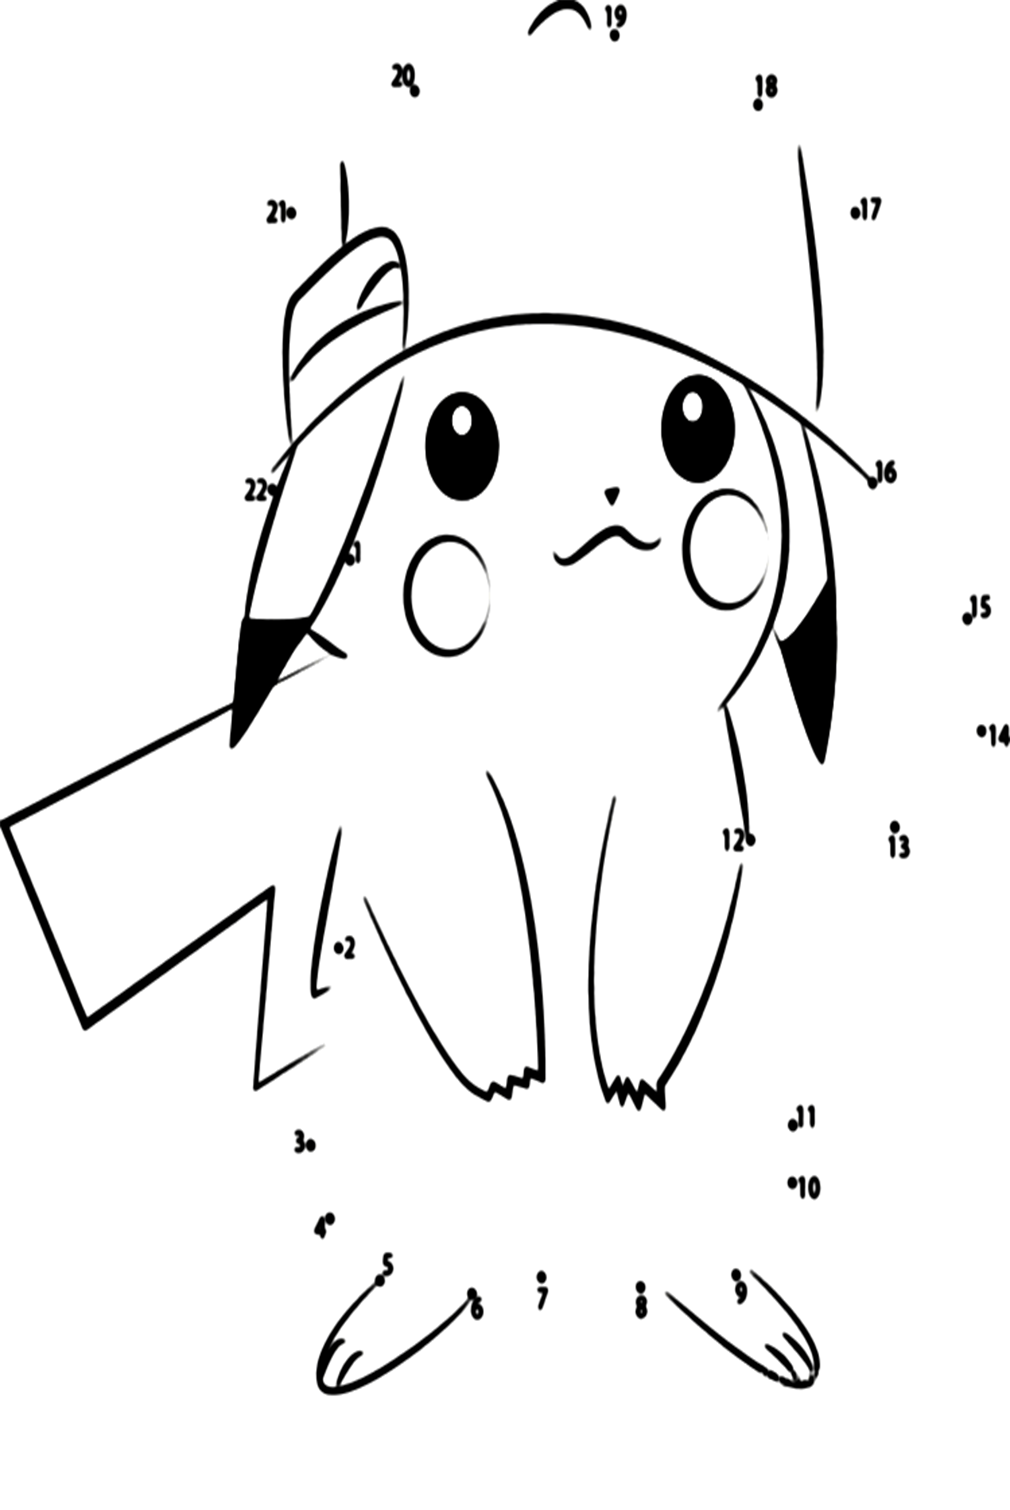 Pikachu Dot To Dot Coloring Pages